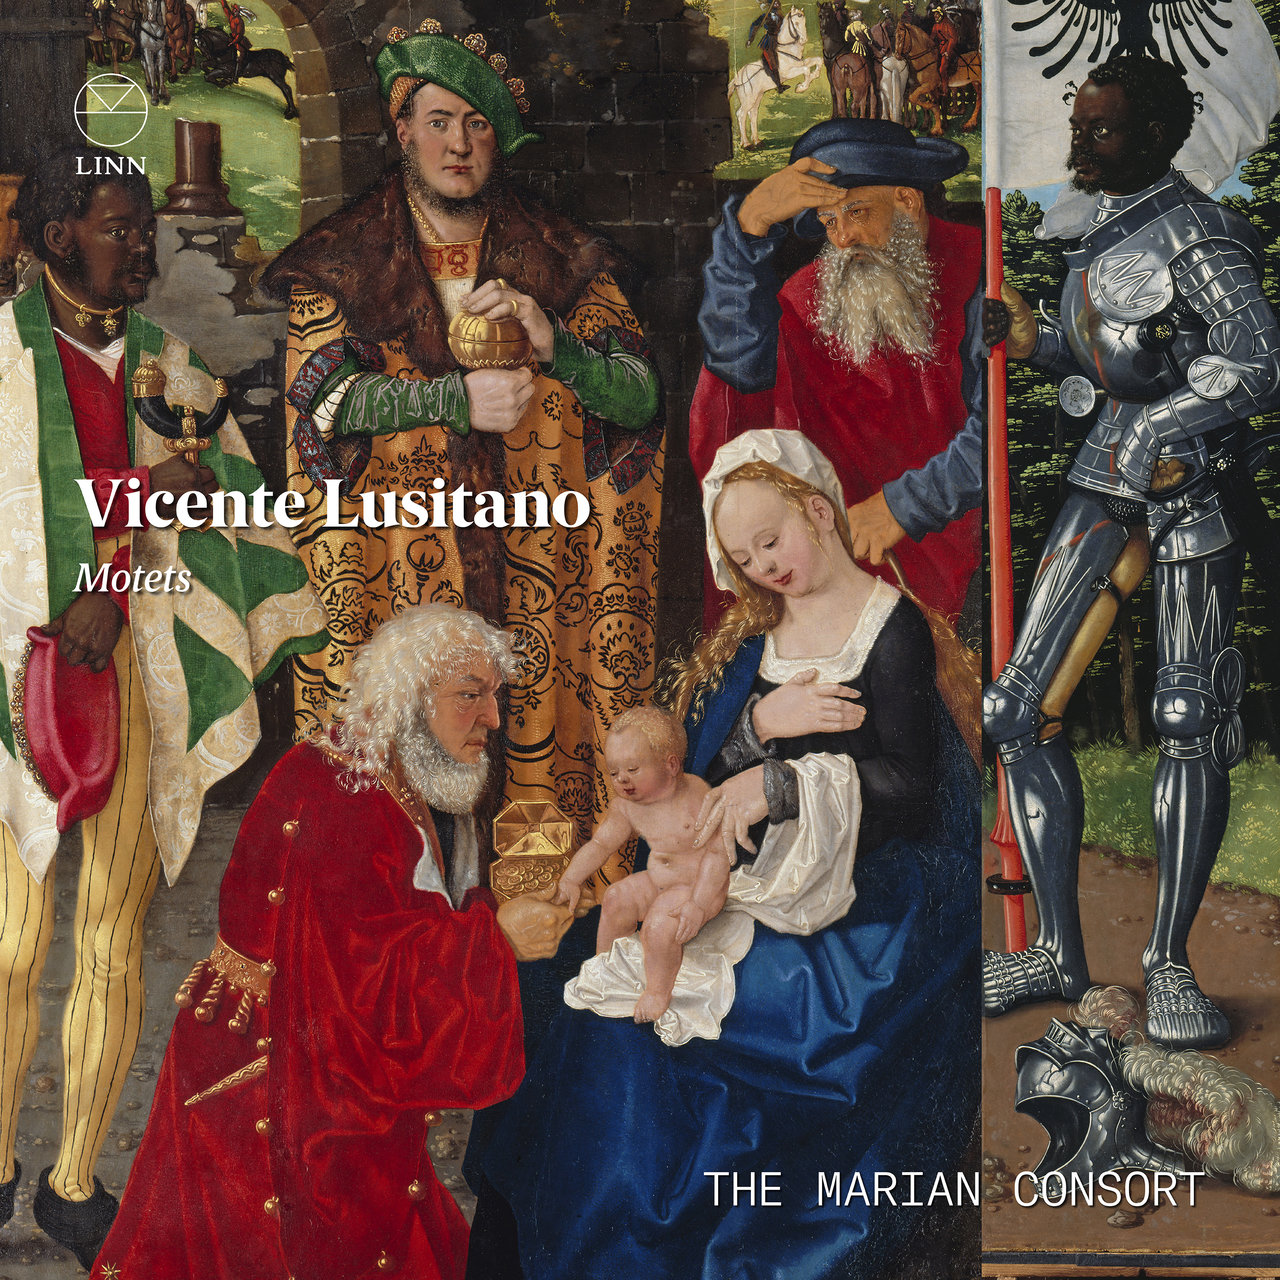 Lusitano, Vicente - Motets, 1551 - The Marian Consort